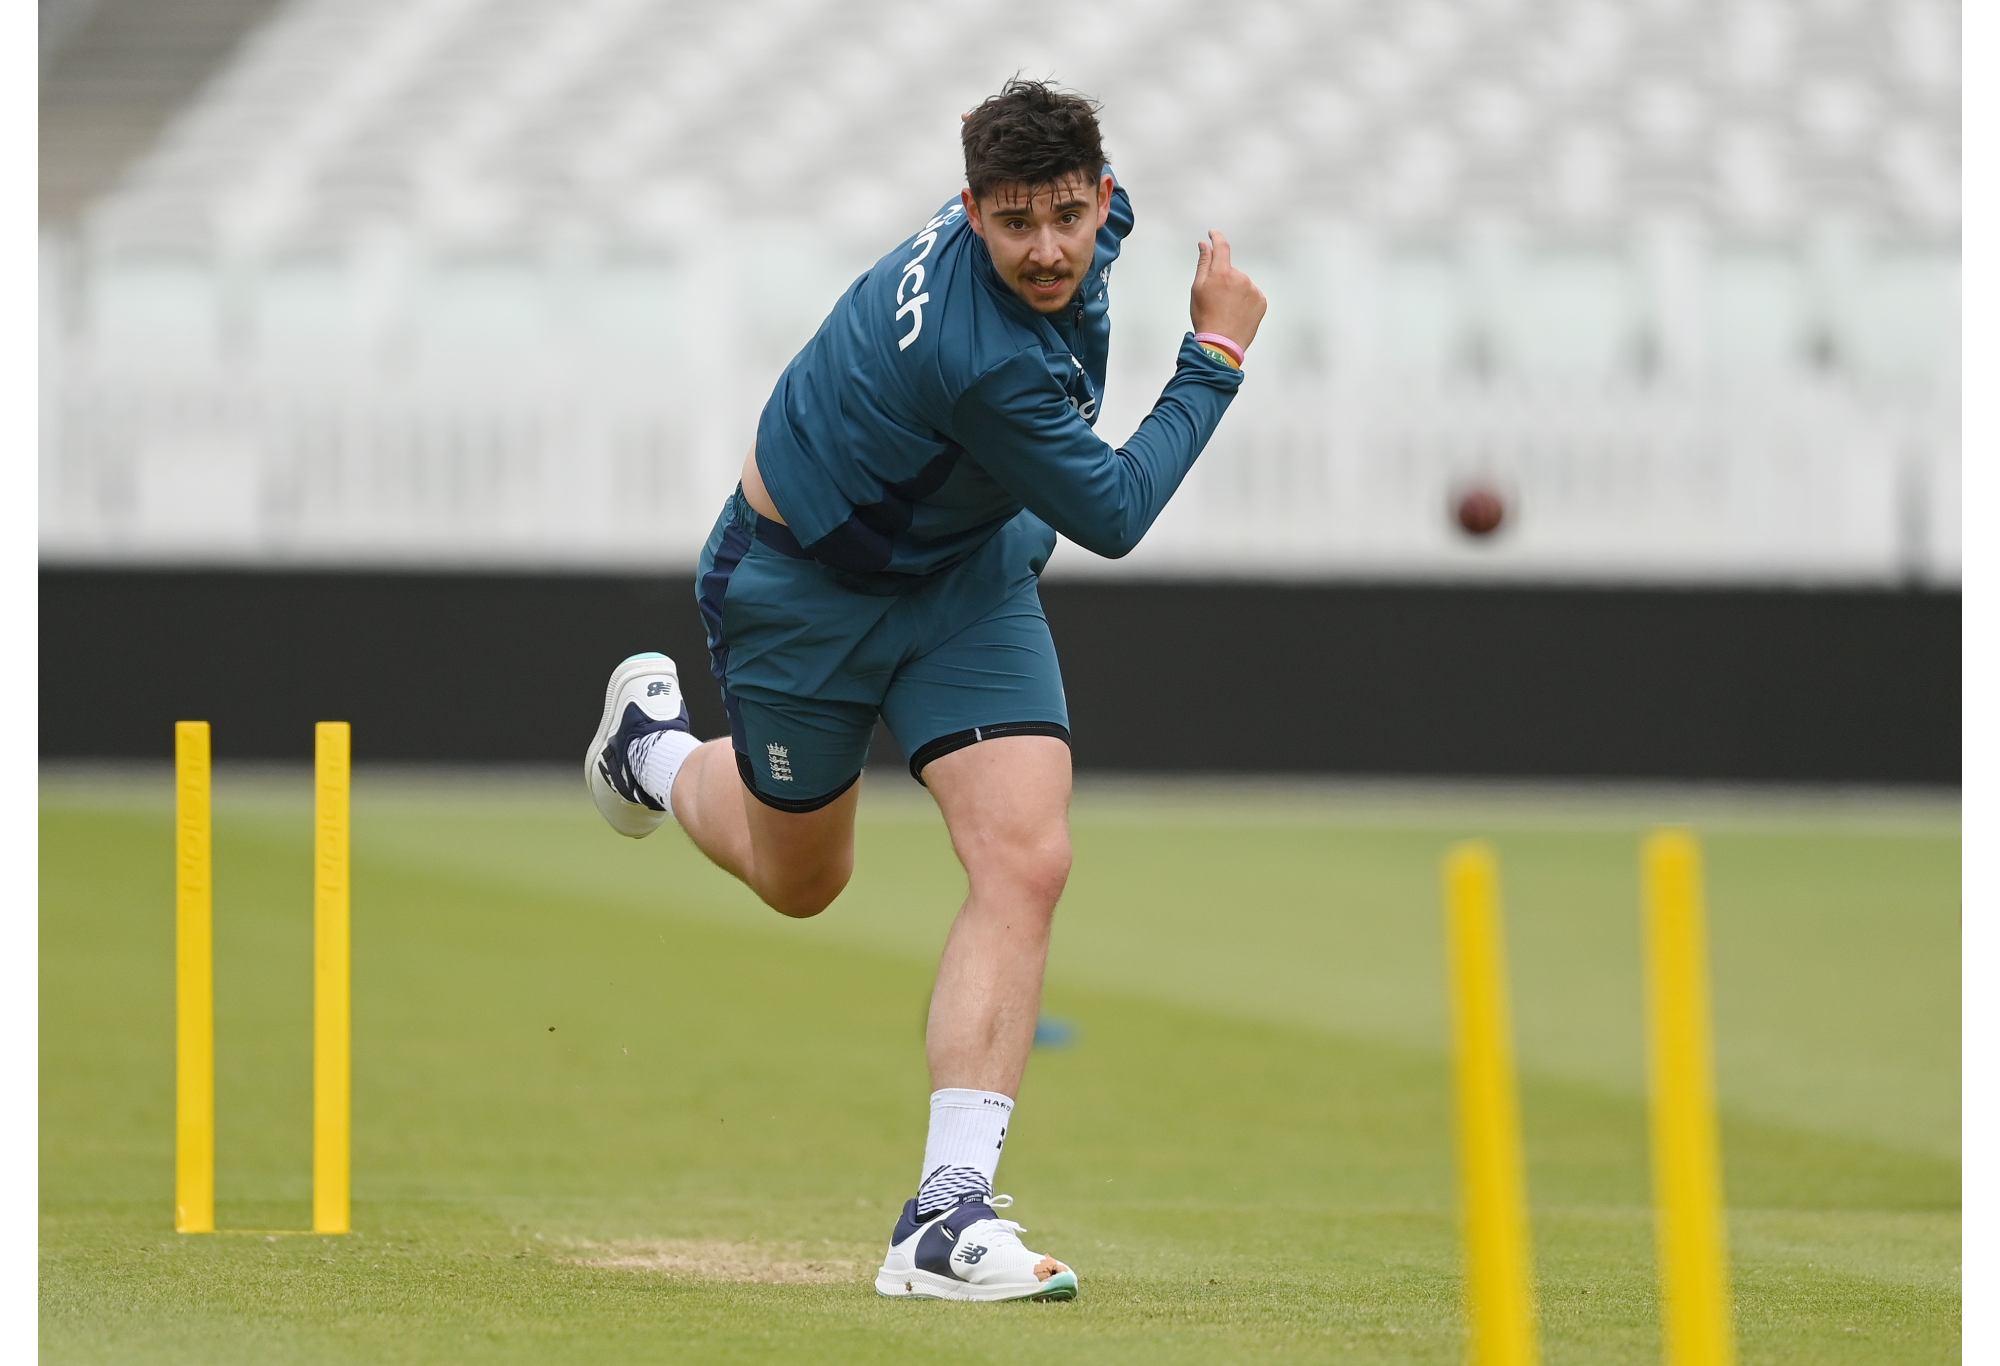 LONDON, ENGLAND - MAY 30: Josh Tongue of England bowls during a training session before Thursday's England and Ireland Test match at Lord's Cricket Ground on May 30, 2023 in London, England. (Photo by Philip Brown/Getty Images)